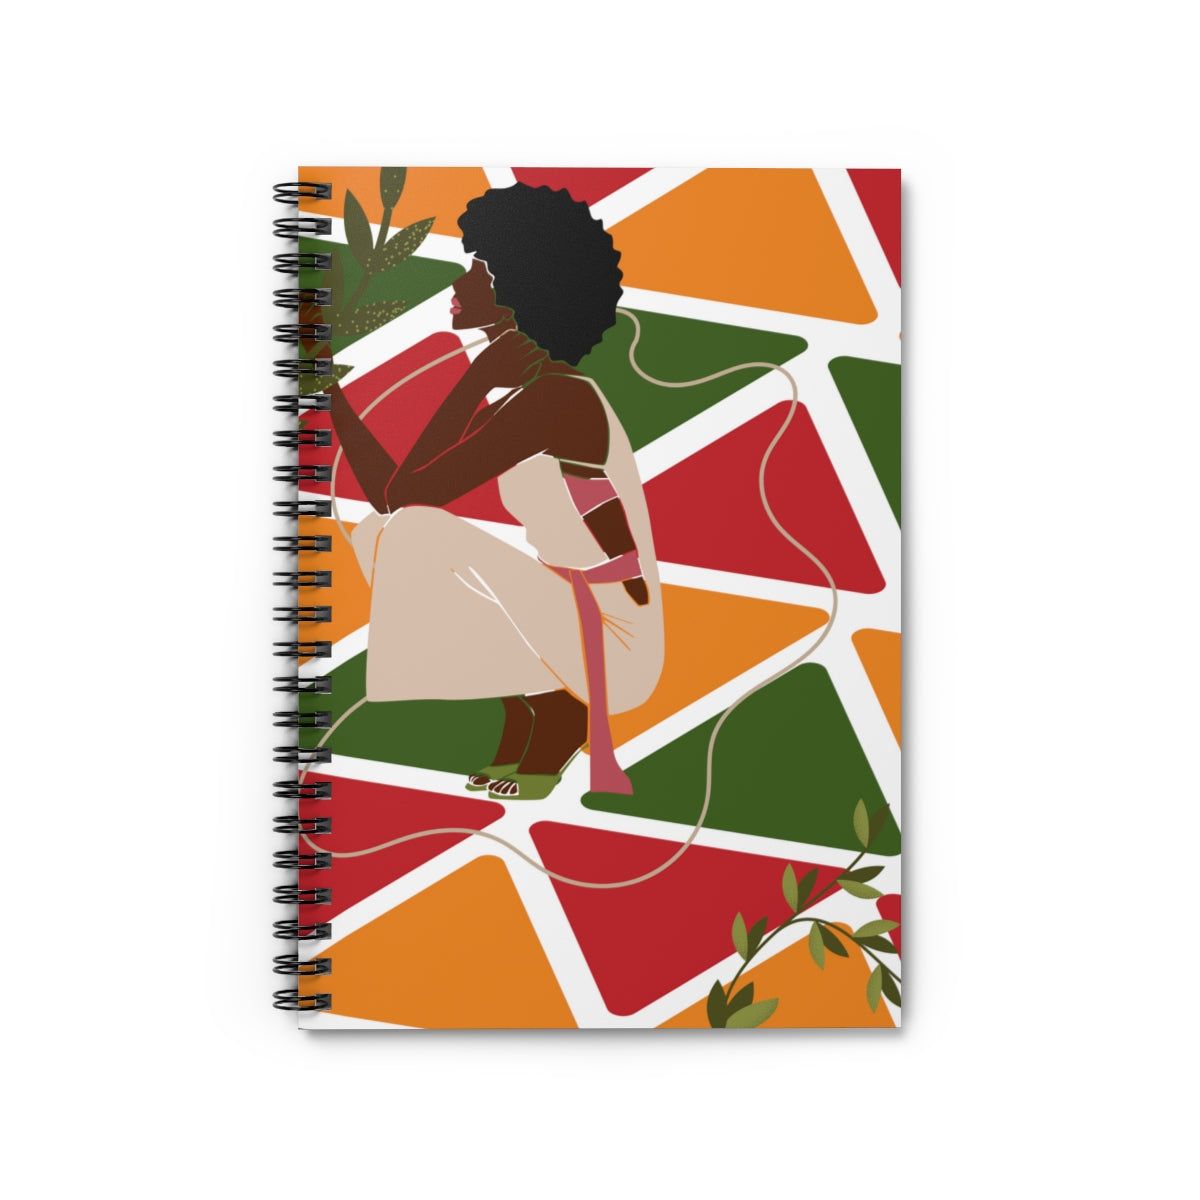 Black woman Diary Fro Blogger Spiral Notebook